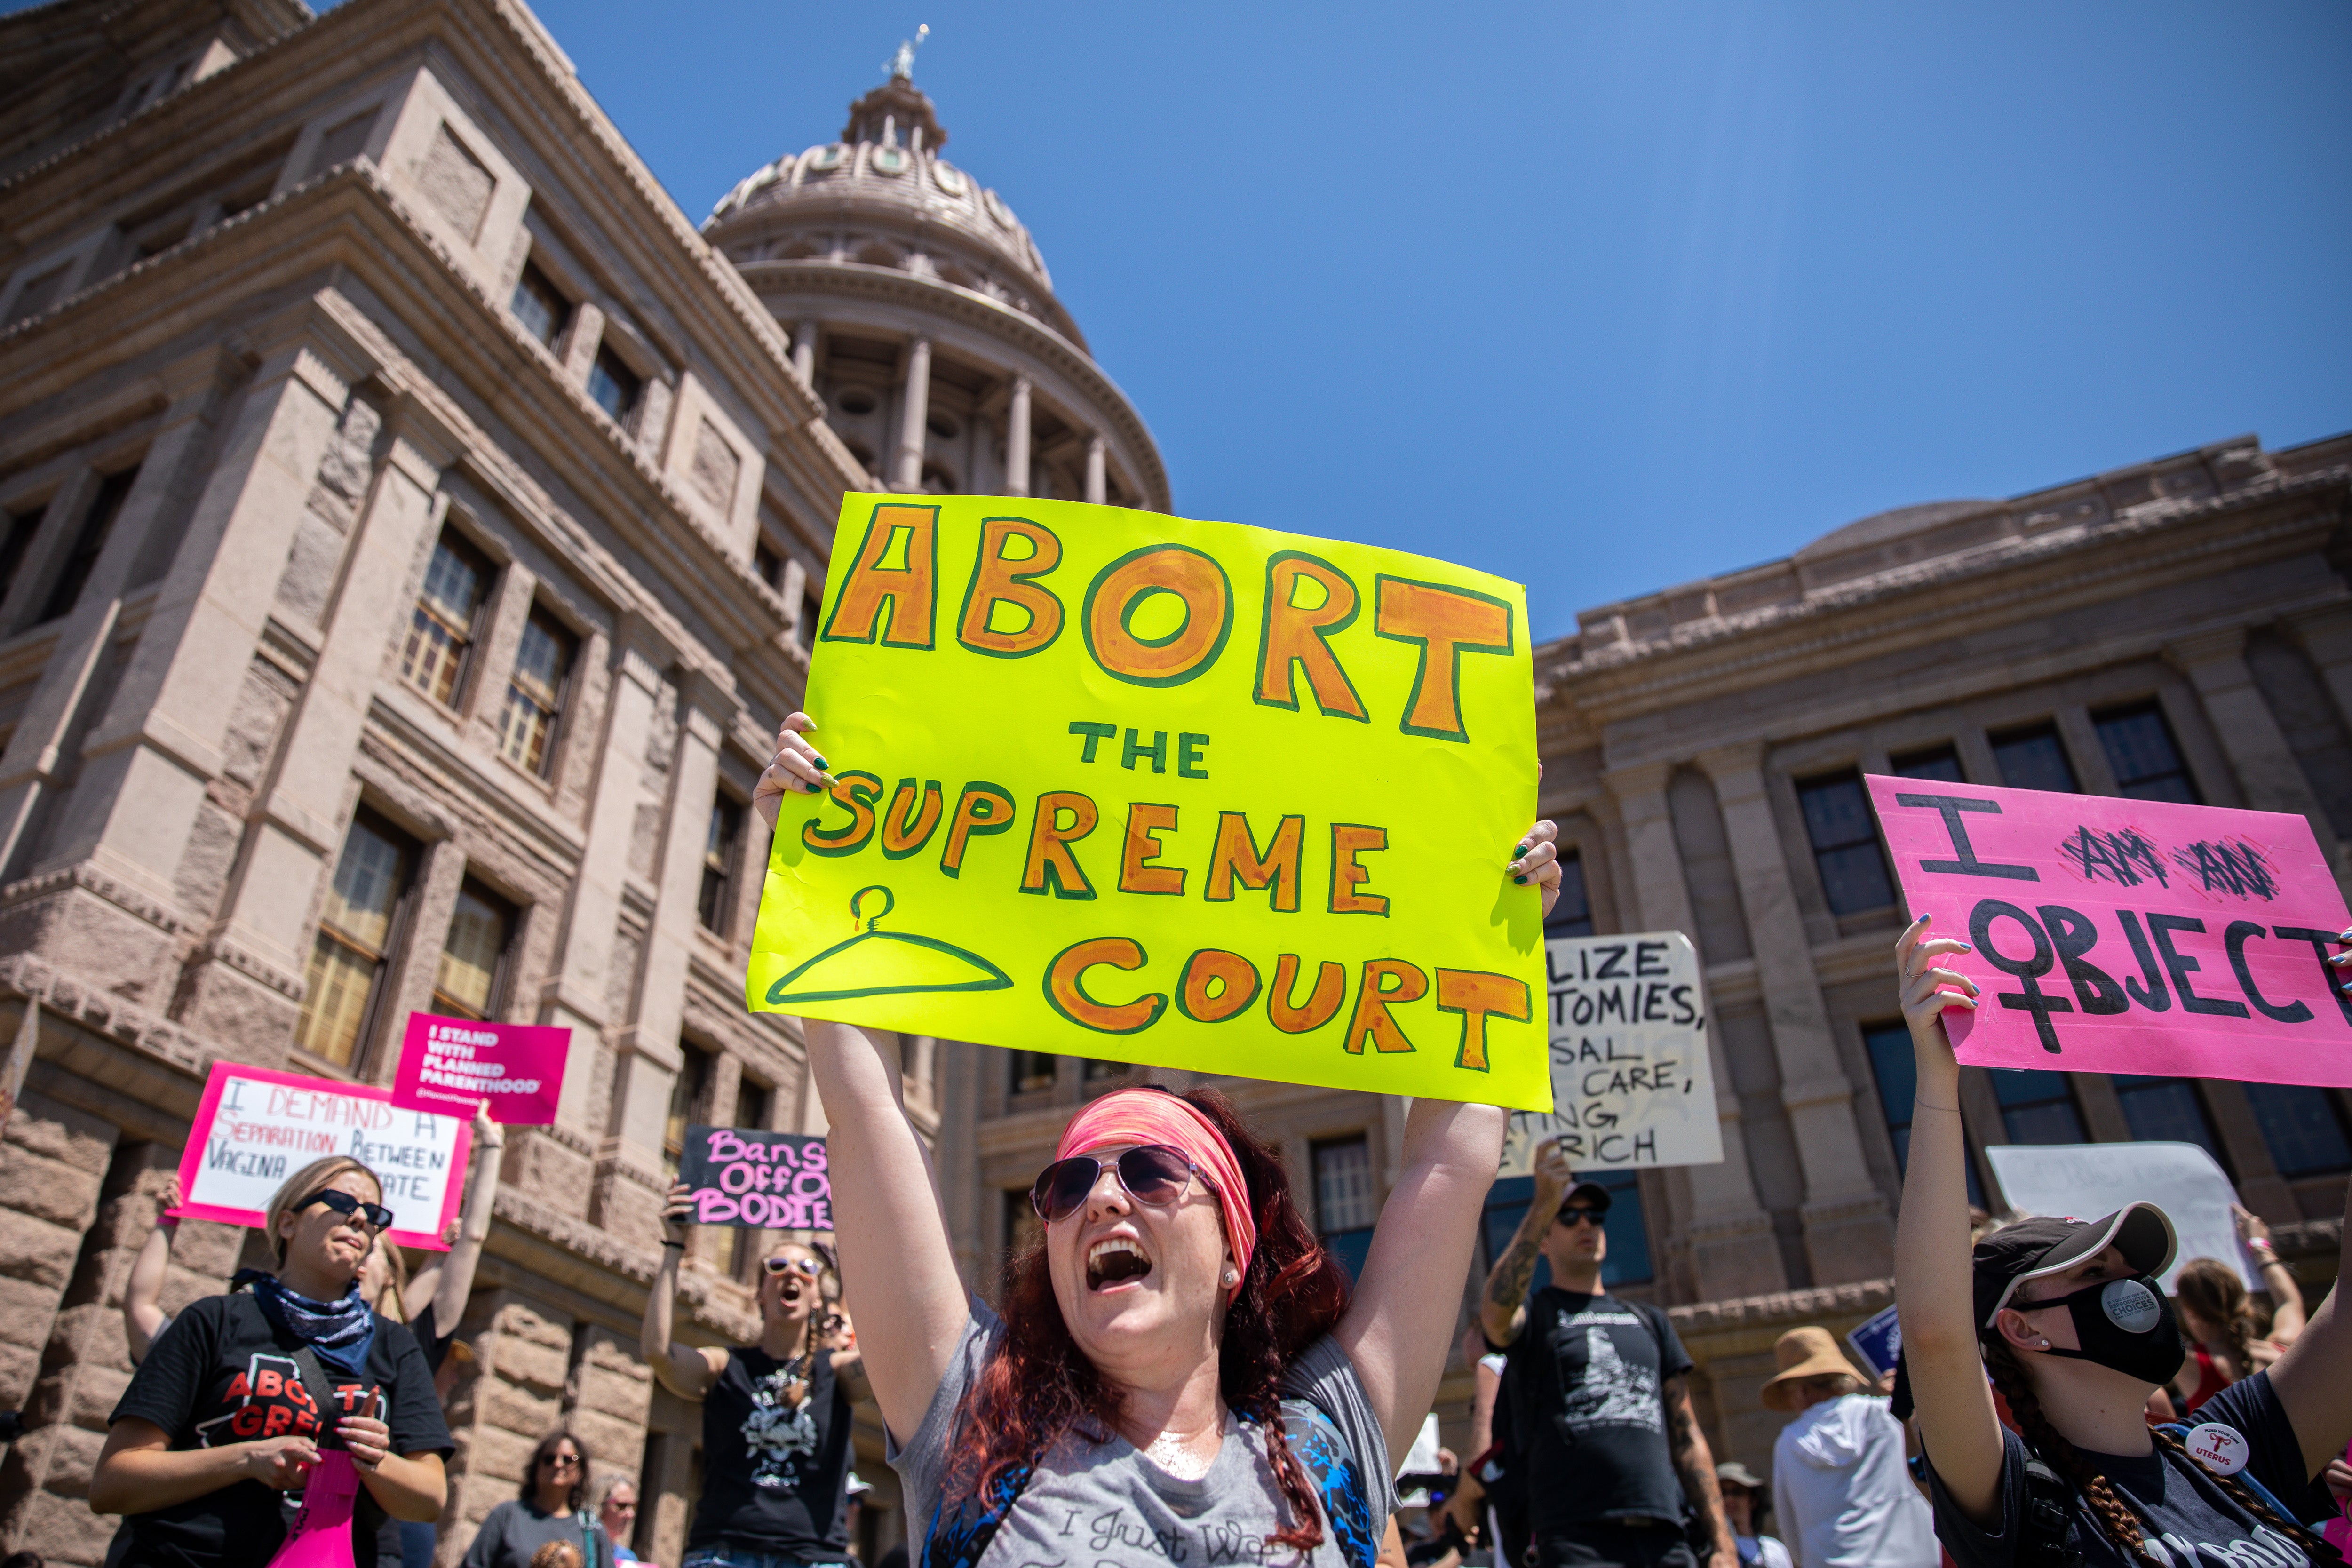 Polls show clear majority of Americans support access to abortion